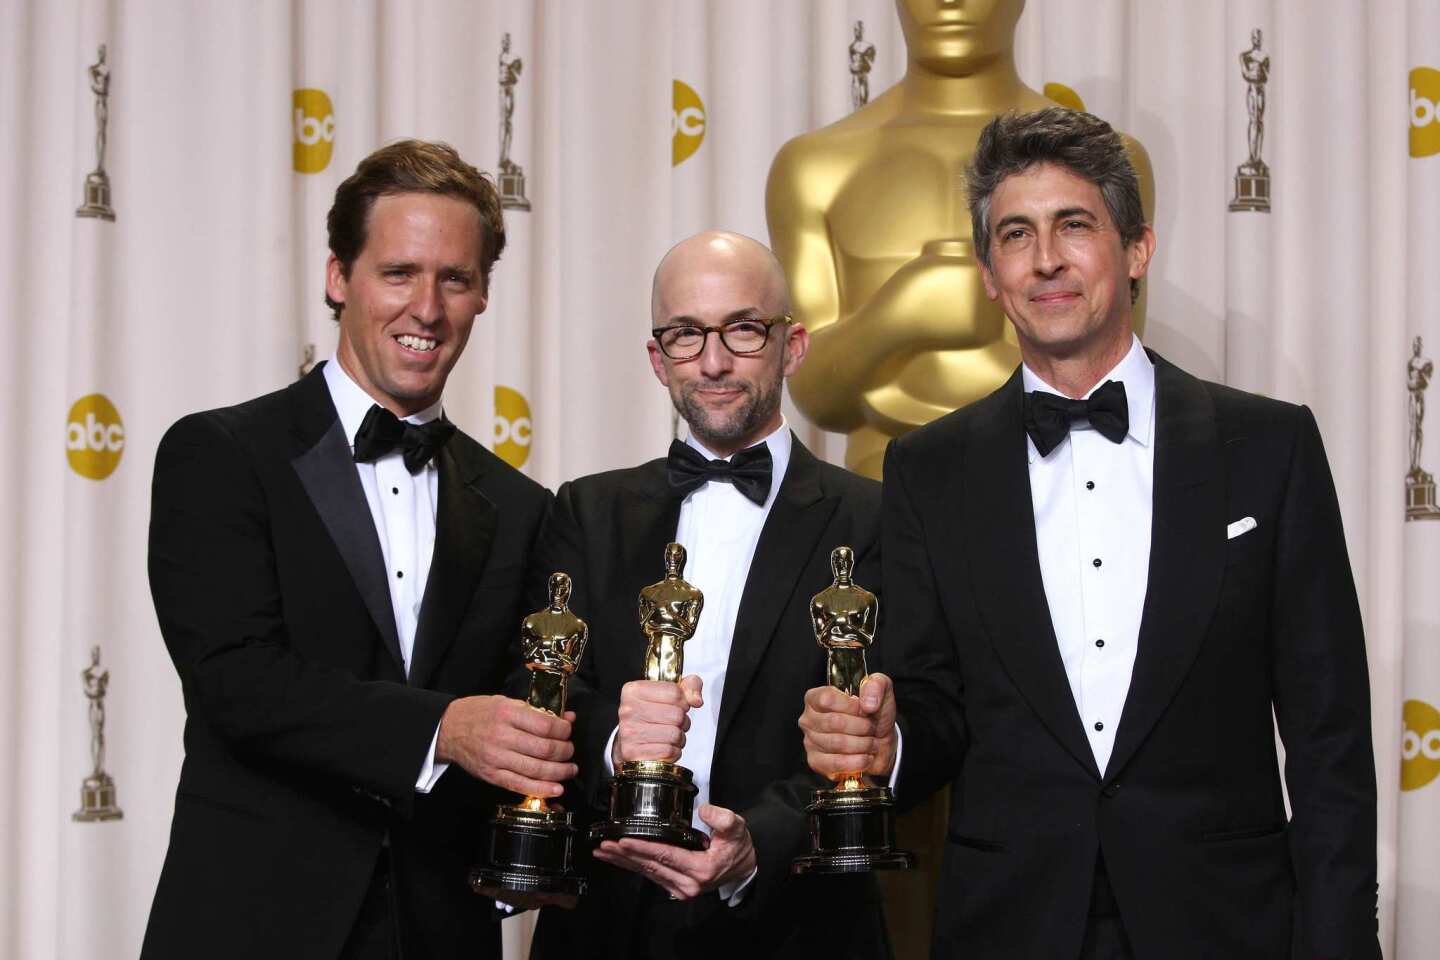 Adapting "The Descendents," based on Kaui Hart Hemmings' novel of the same name, was a fluid, organic process, said Alexander Payne, right, backstage after the film won the Oscar for adapted screenplay. Screenwriters Jim Rash, left, and Nat Faxon, he says, gave him myriad directions to take the material in. "They paved a path for me because they'd been through the book quite a few times," said Payne. "They gave me the luxury to pick and choose what I responded to. What I didn't keep was as much screen time with the younger daughter."